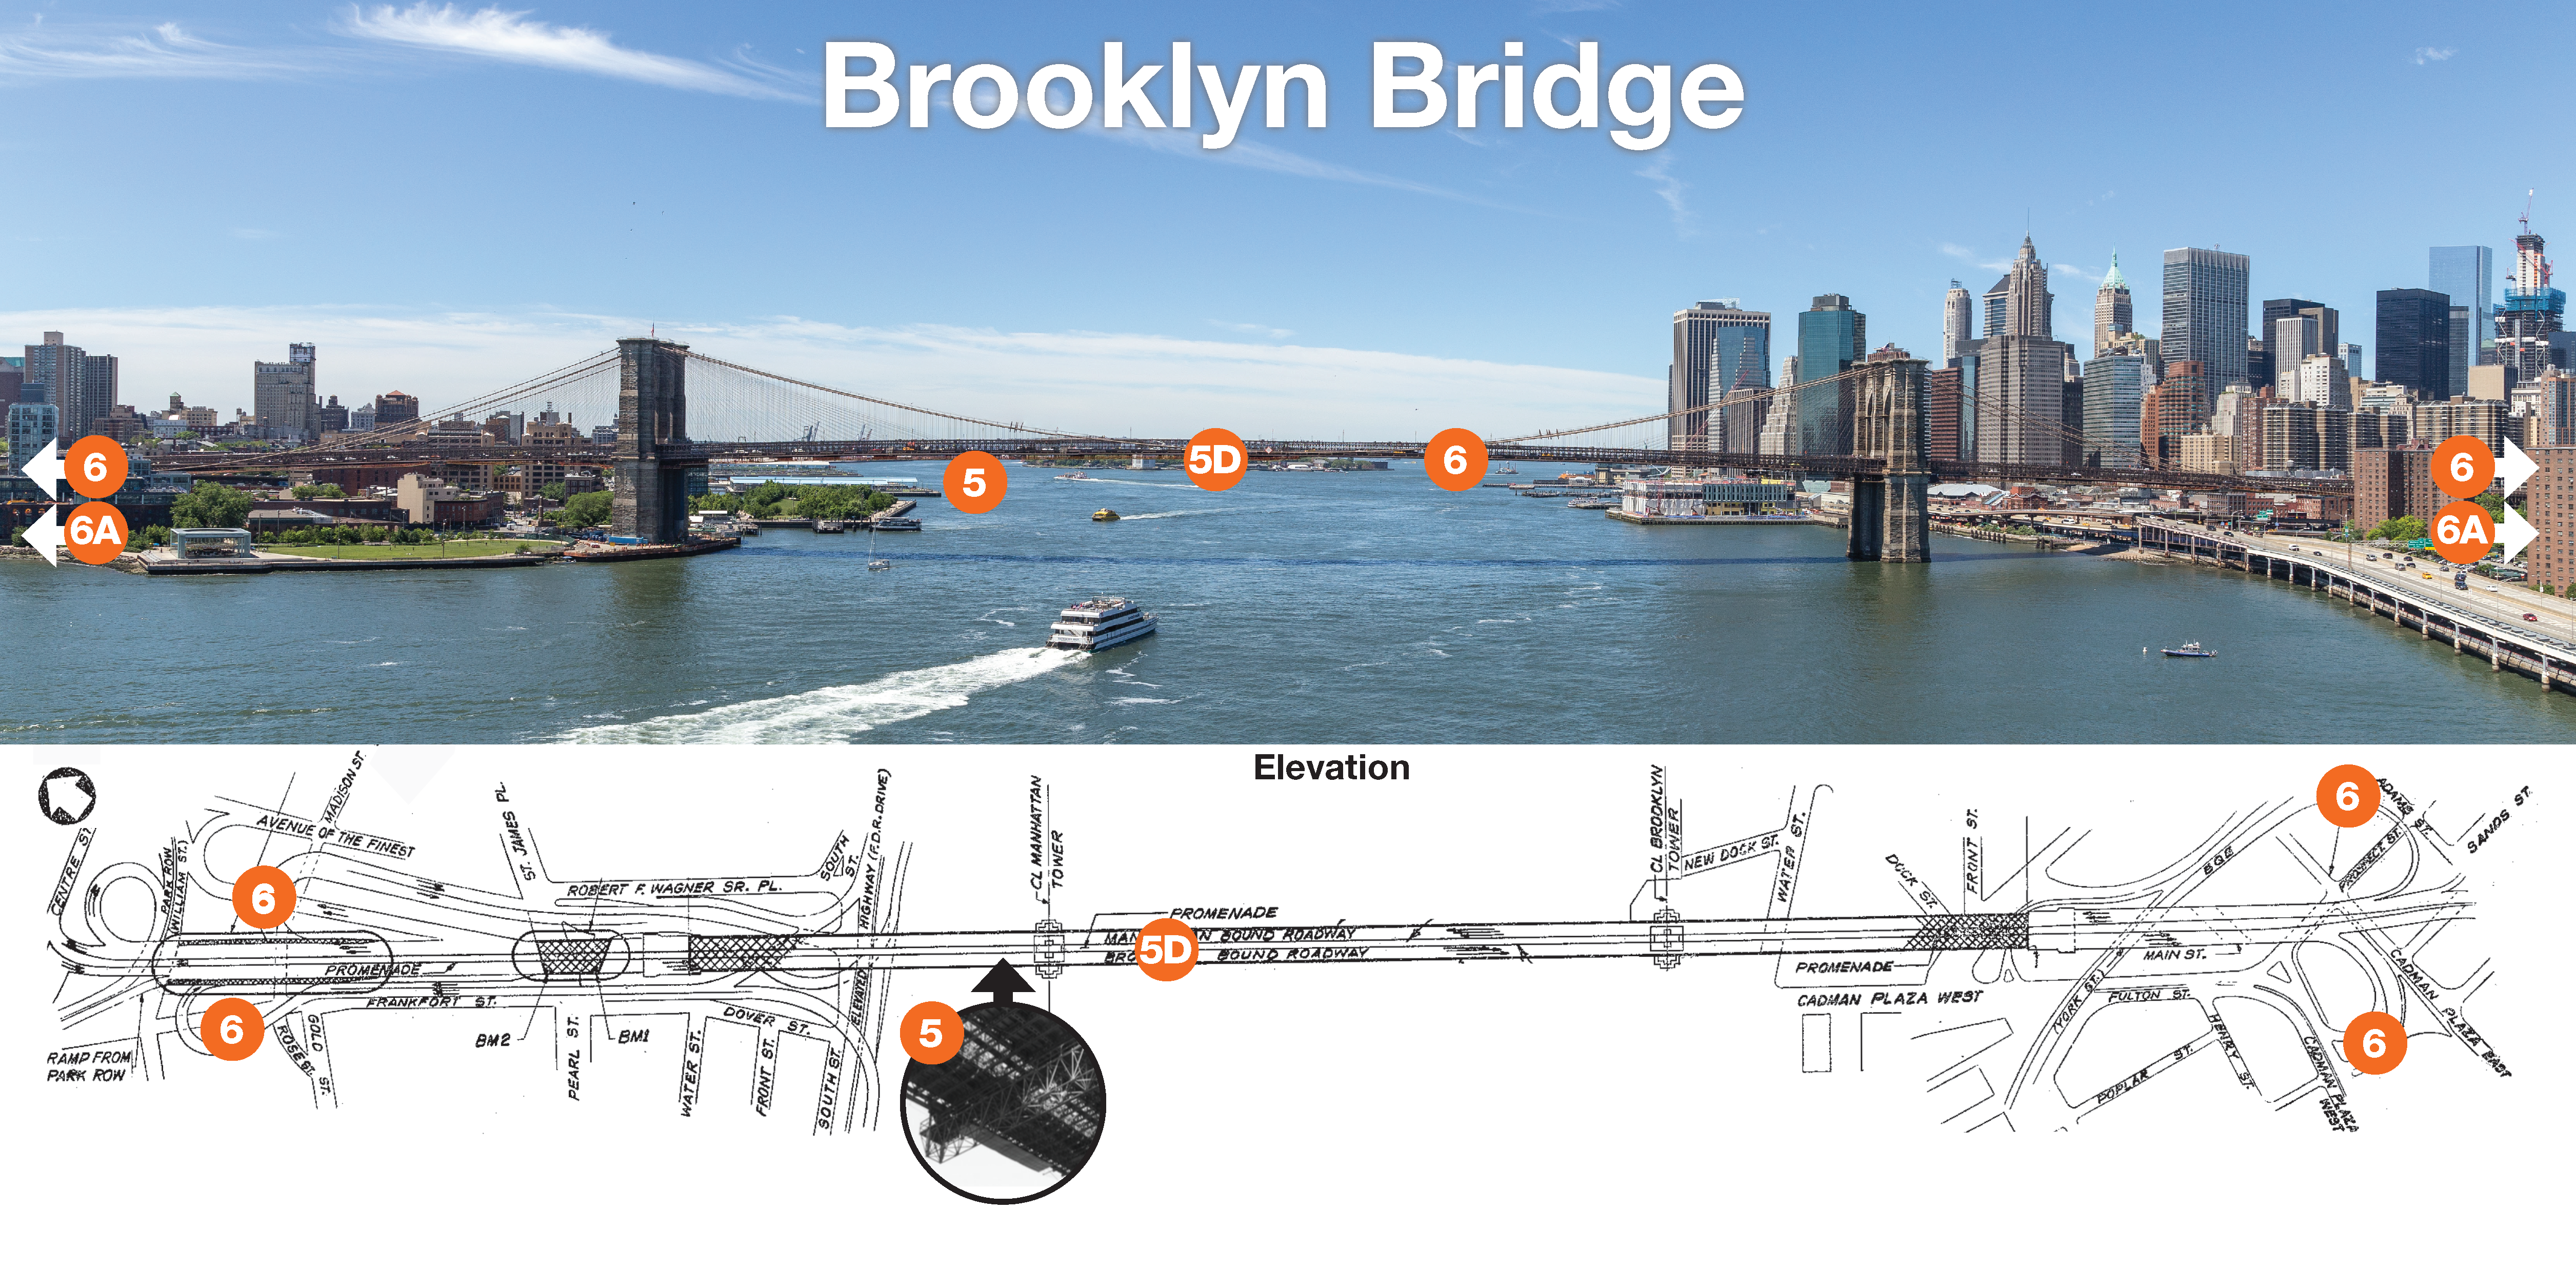 Picture and diagram of the Brooklyn Bridge with labels to highlight where on the bridge work has been done under previous contracts.